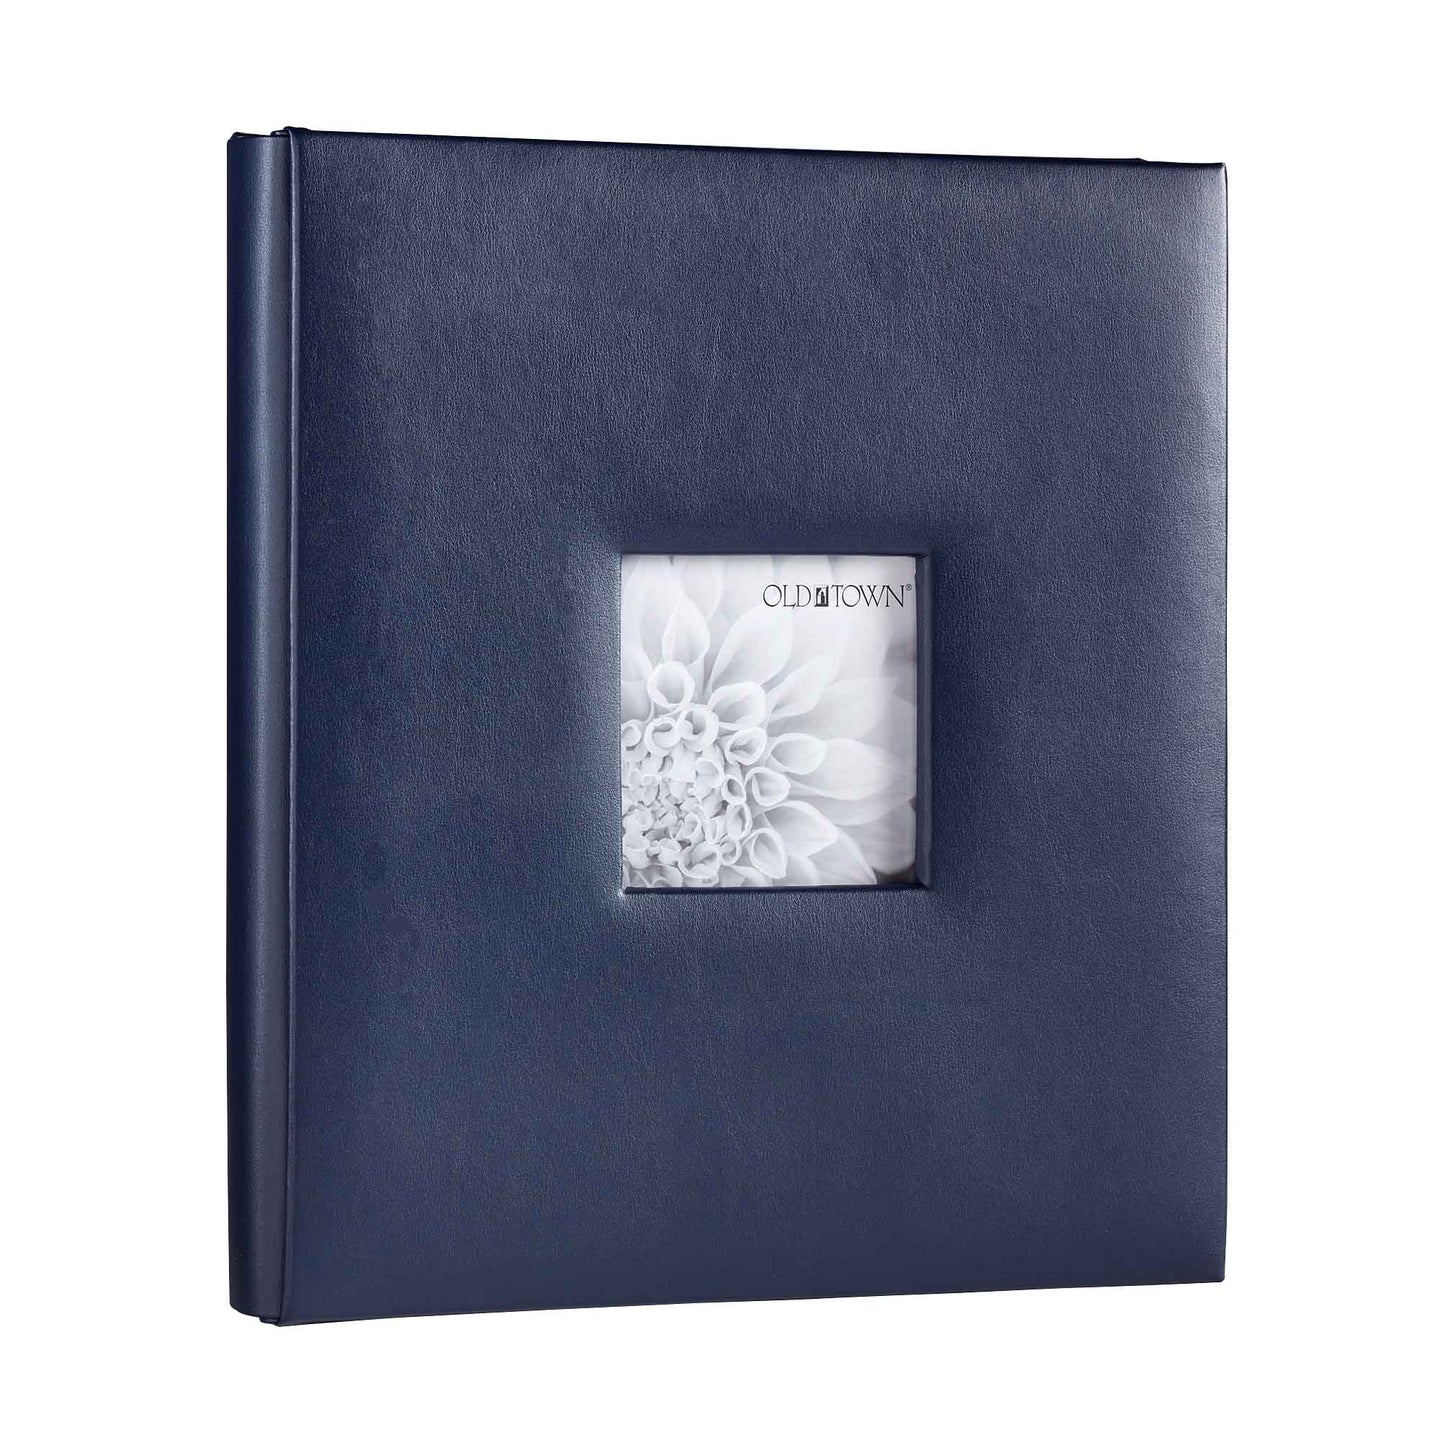 Single navy leather photo album with 4x4 inch window for displaying a photo.